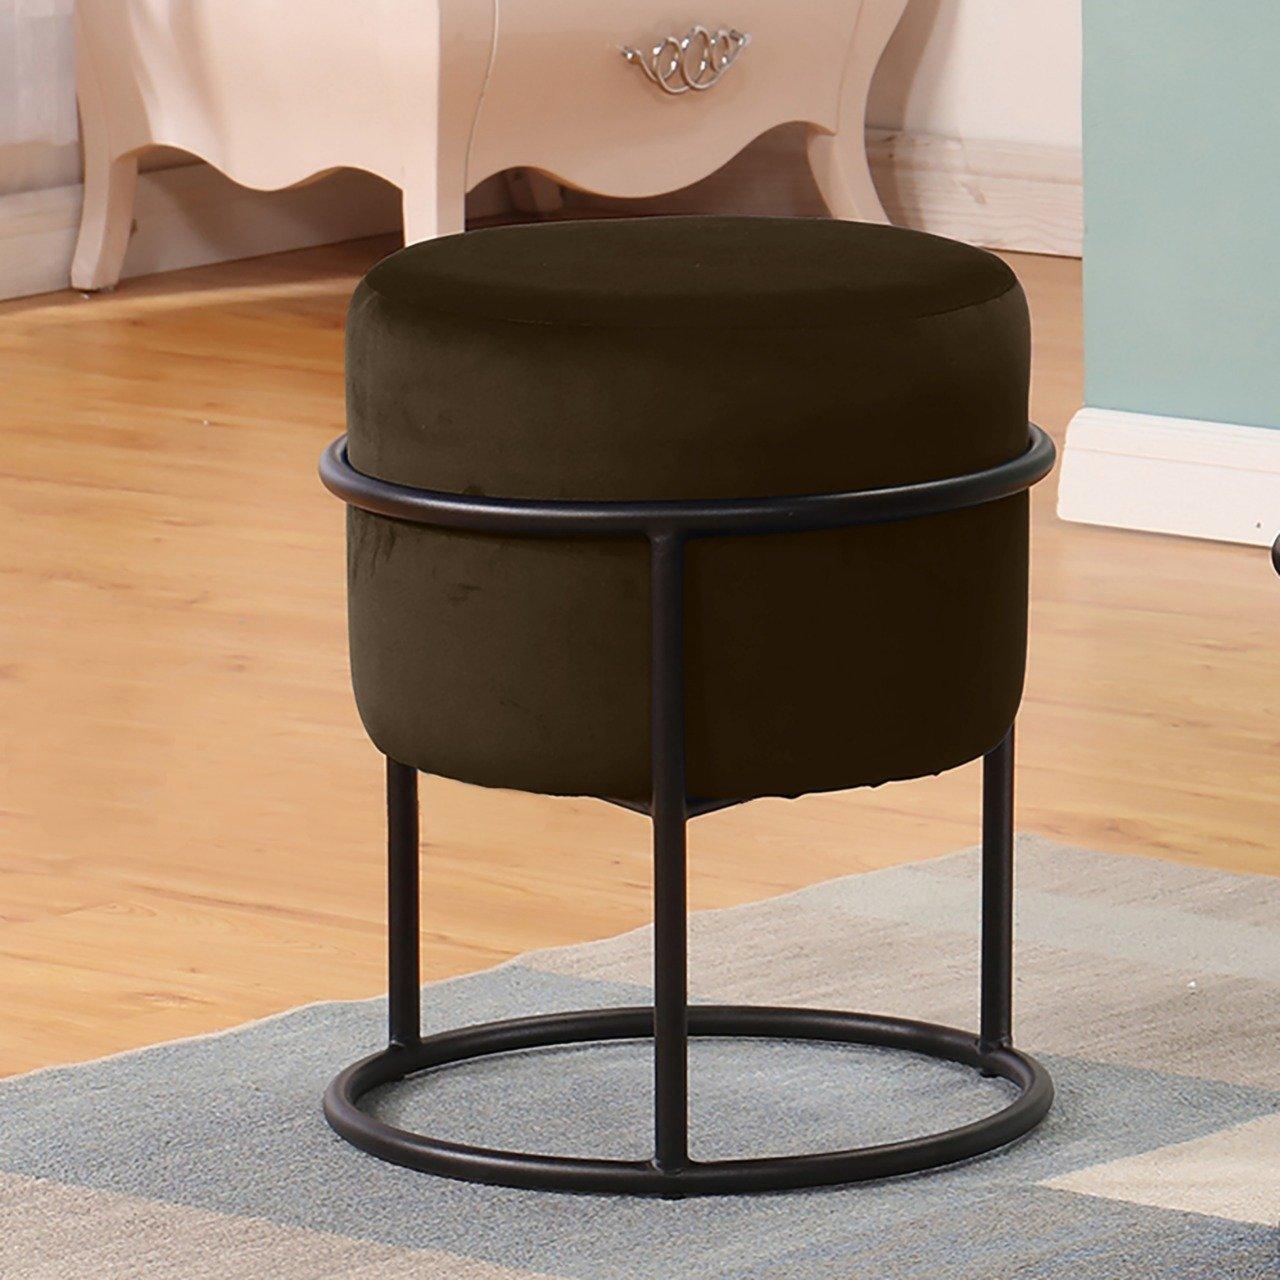 Luxury Wooden Round stool With Steel Stand -340 - 92Bedding